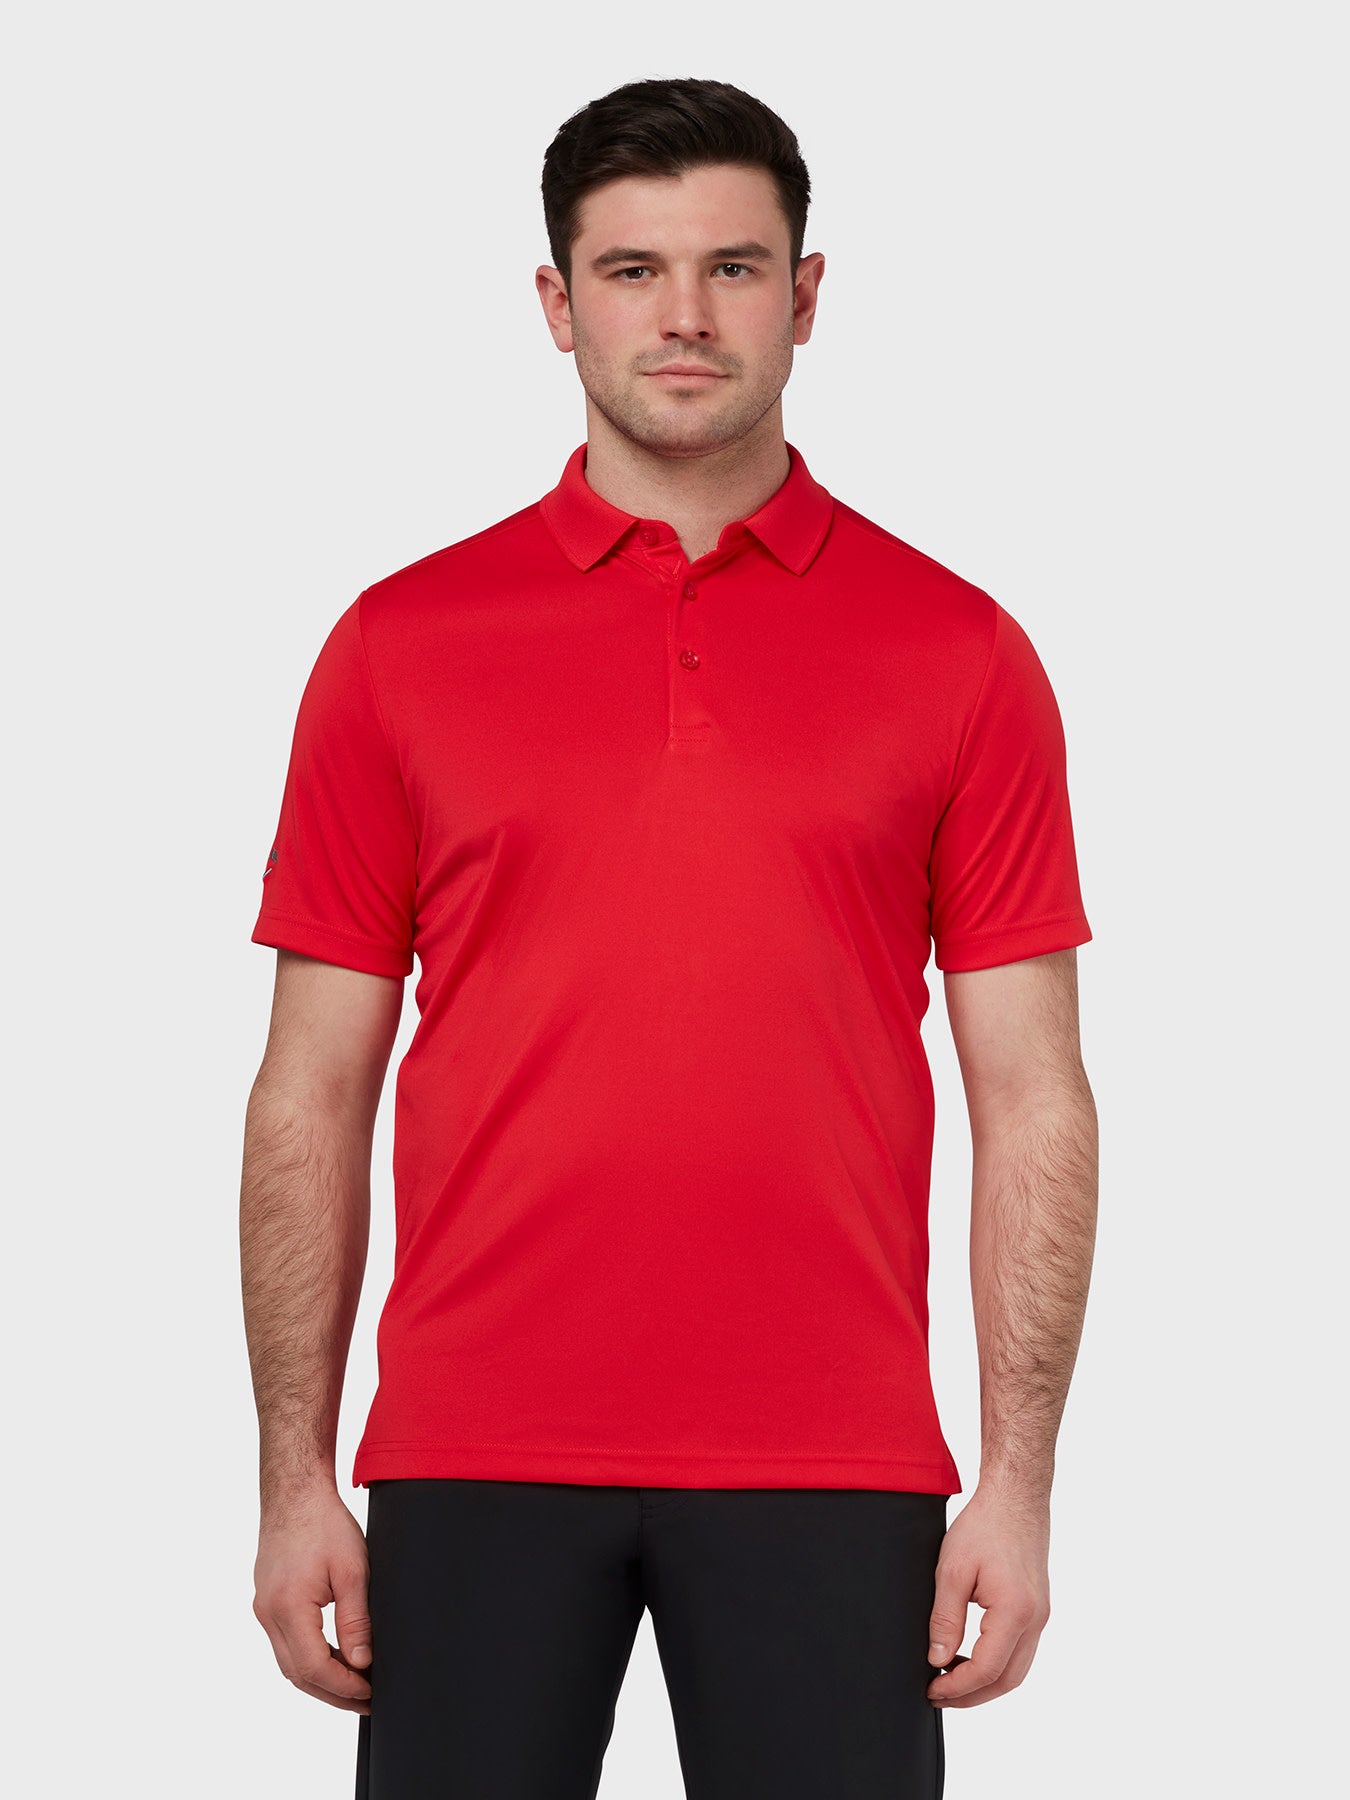 View Tournament Polo In True Red True Red S information